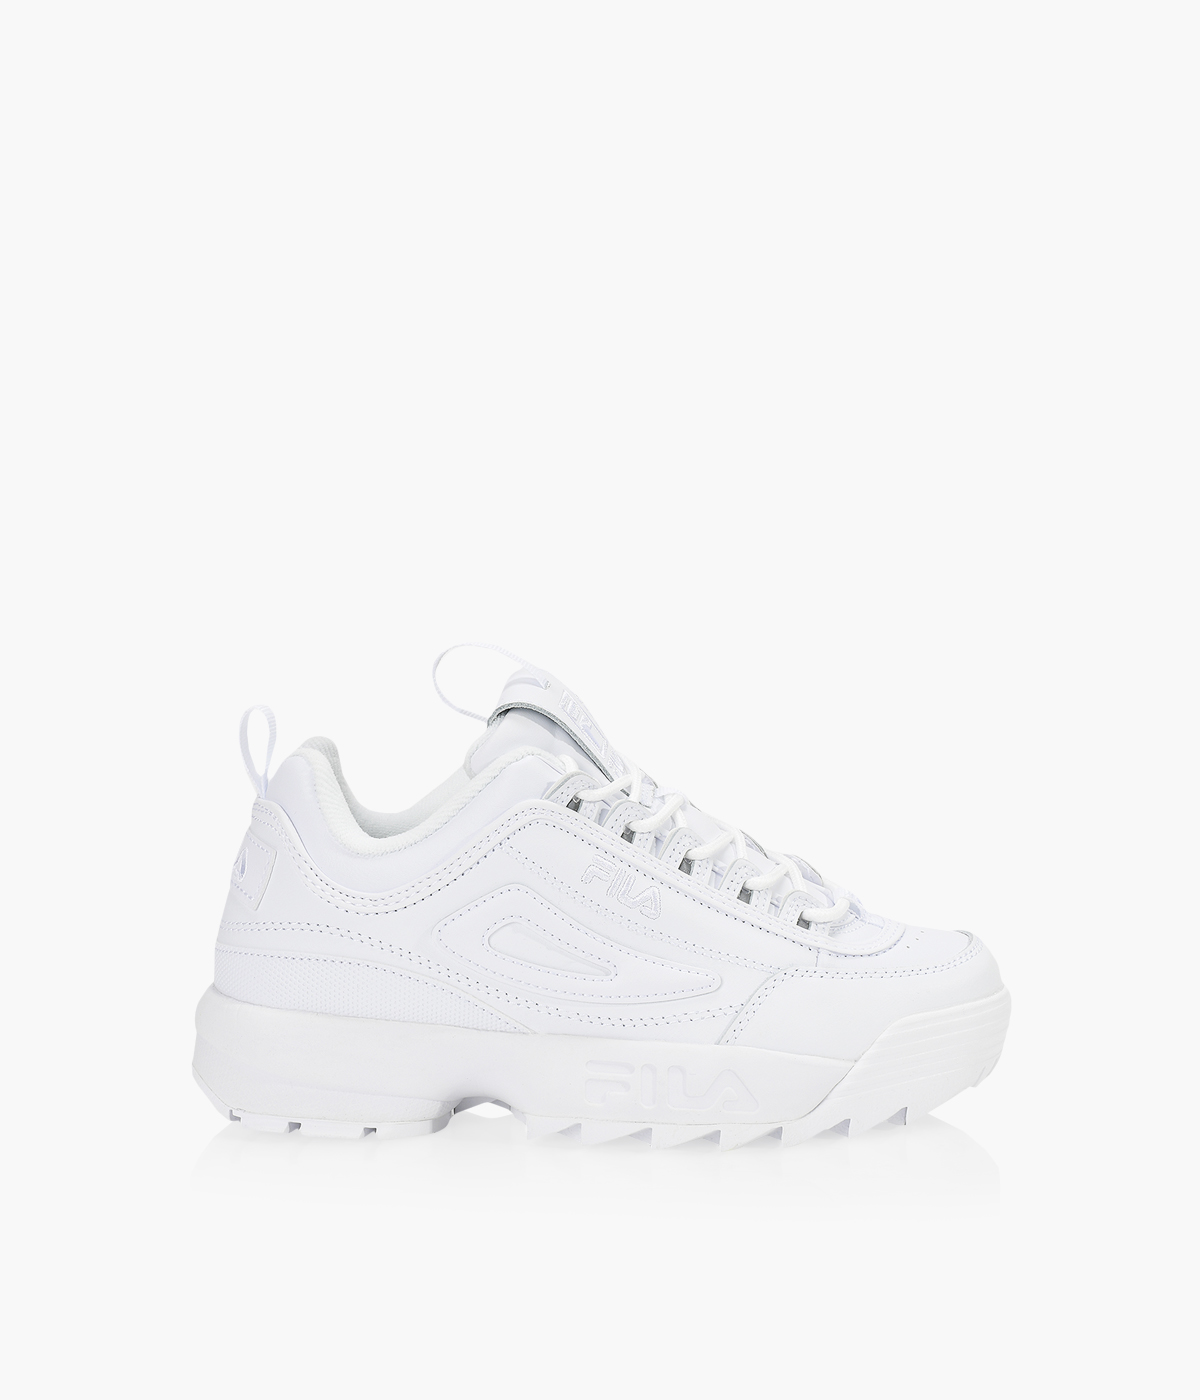 FILA DISRUPTOR 2 PREMIUM - White Leather + Synthetic | BrownsShoes